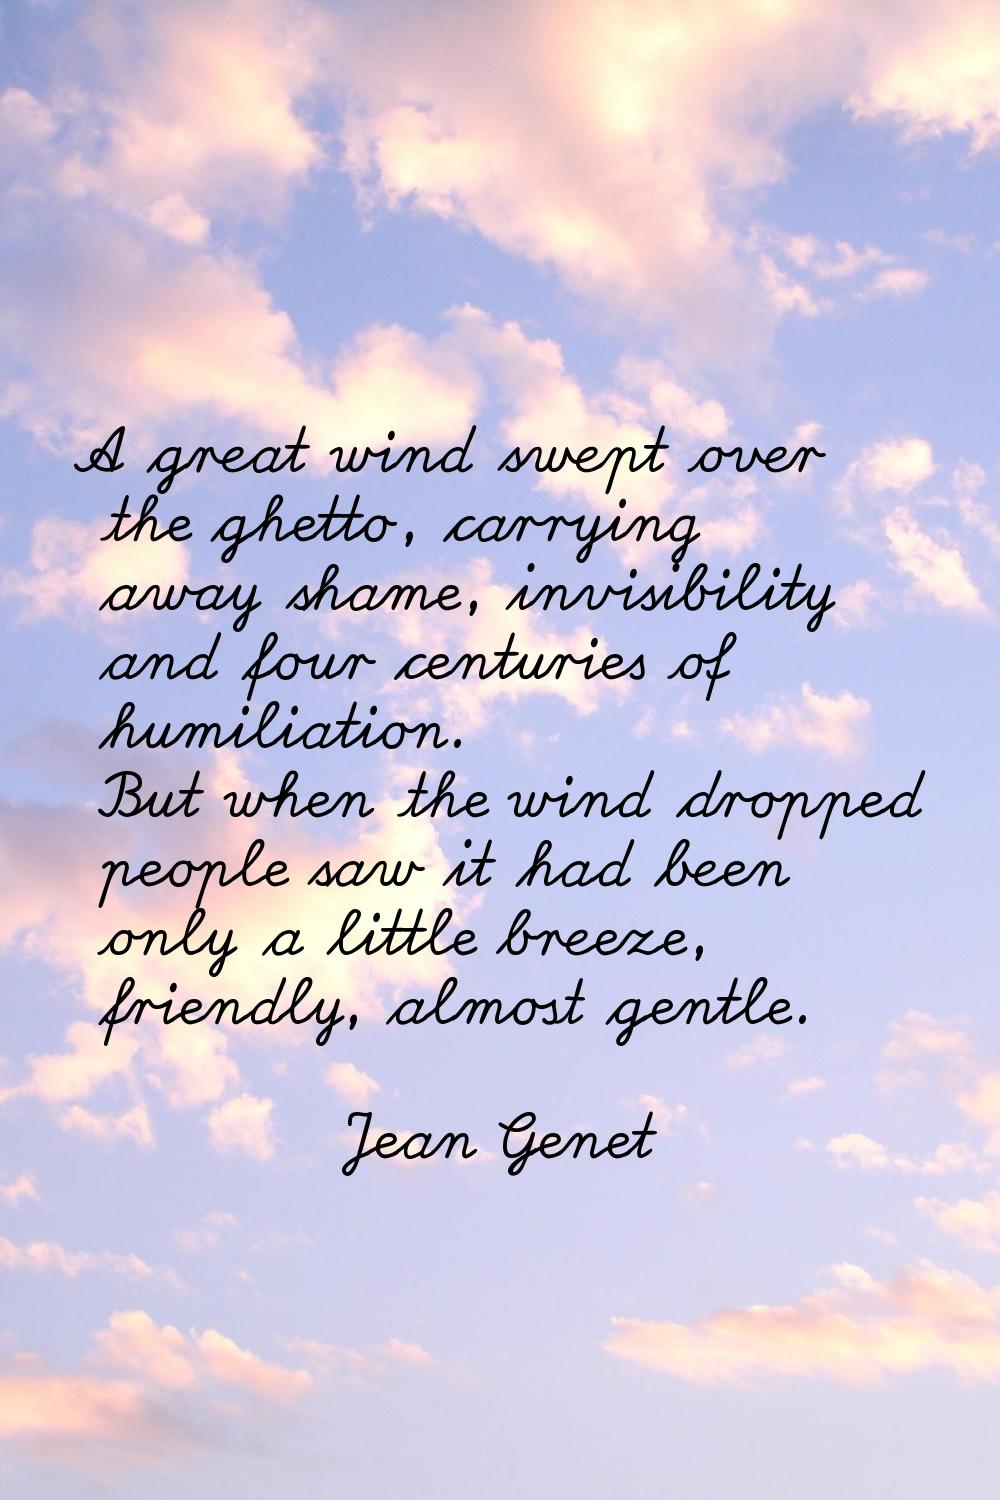 A great wind swept over the ghetto, carrying away shame, invisibility and four centuries of humilia